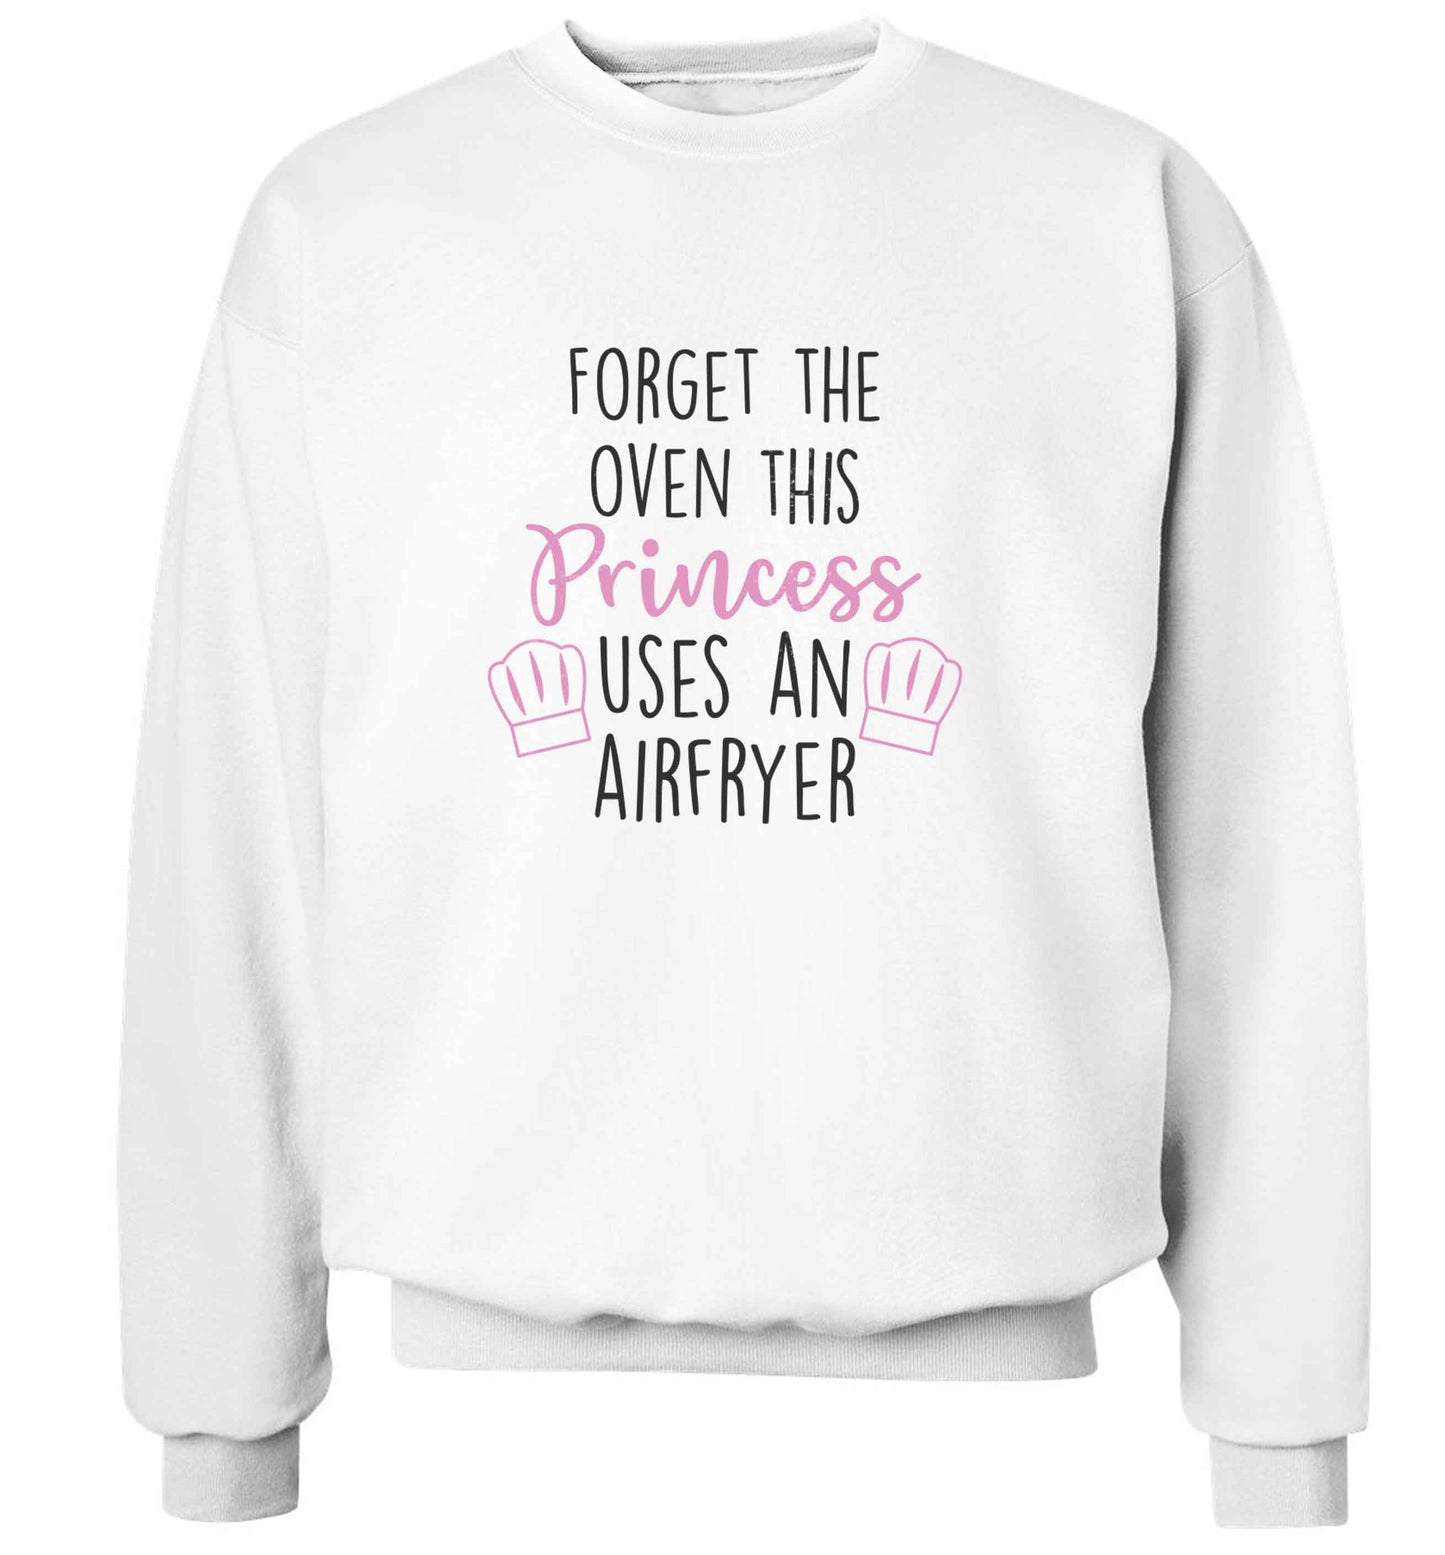 Forget the oven this princess uses an airfryeradult's unisex white sweater 2XL